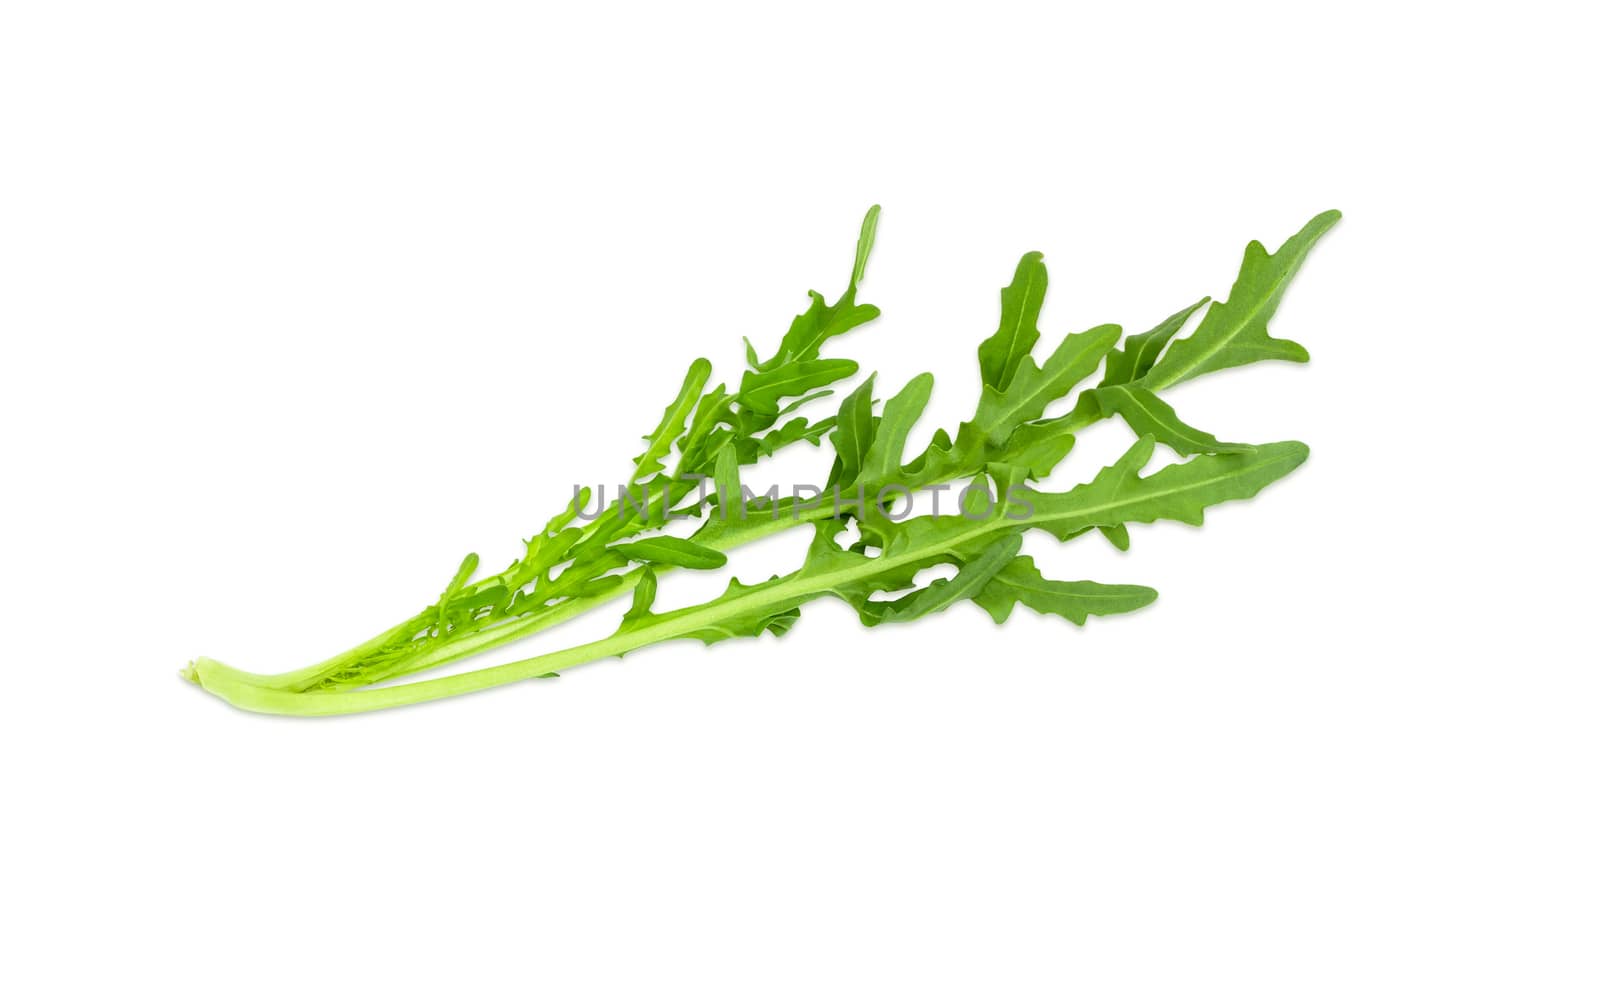 Stem of the fresh arugula with several twigs and leaves closeup on a light background
